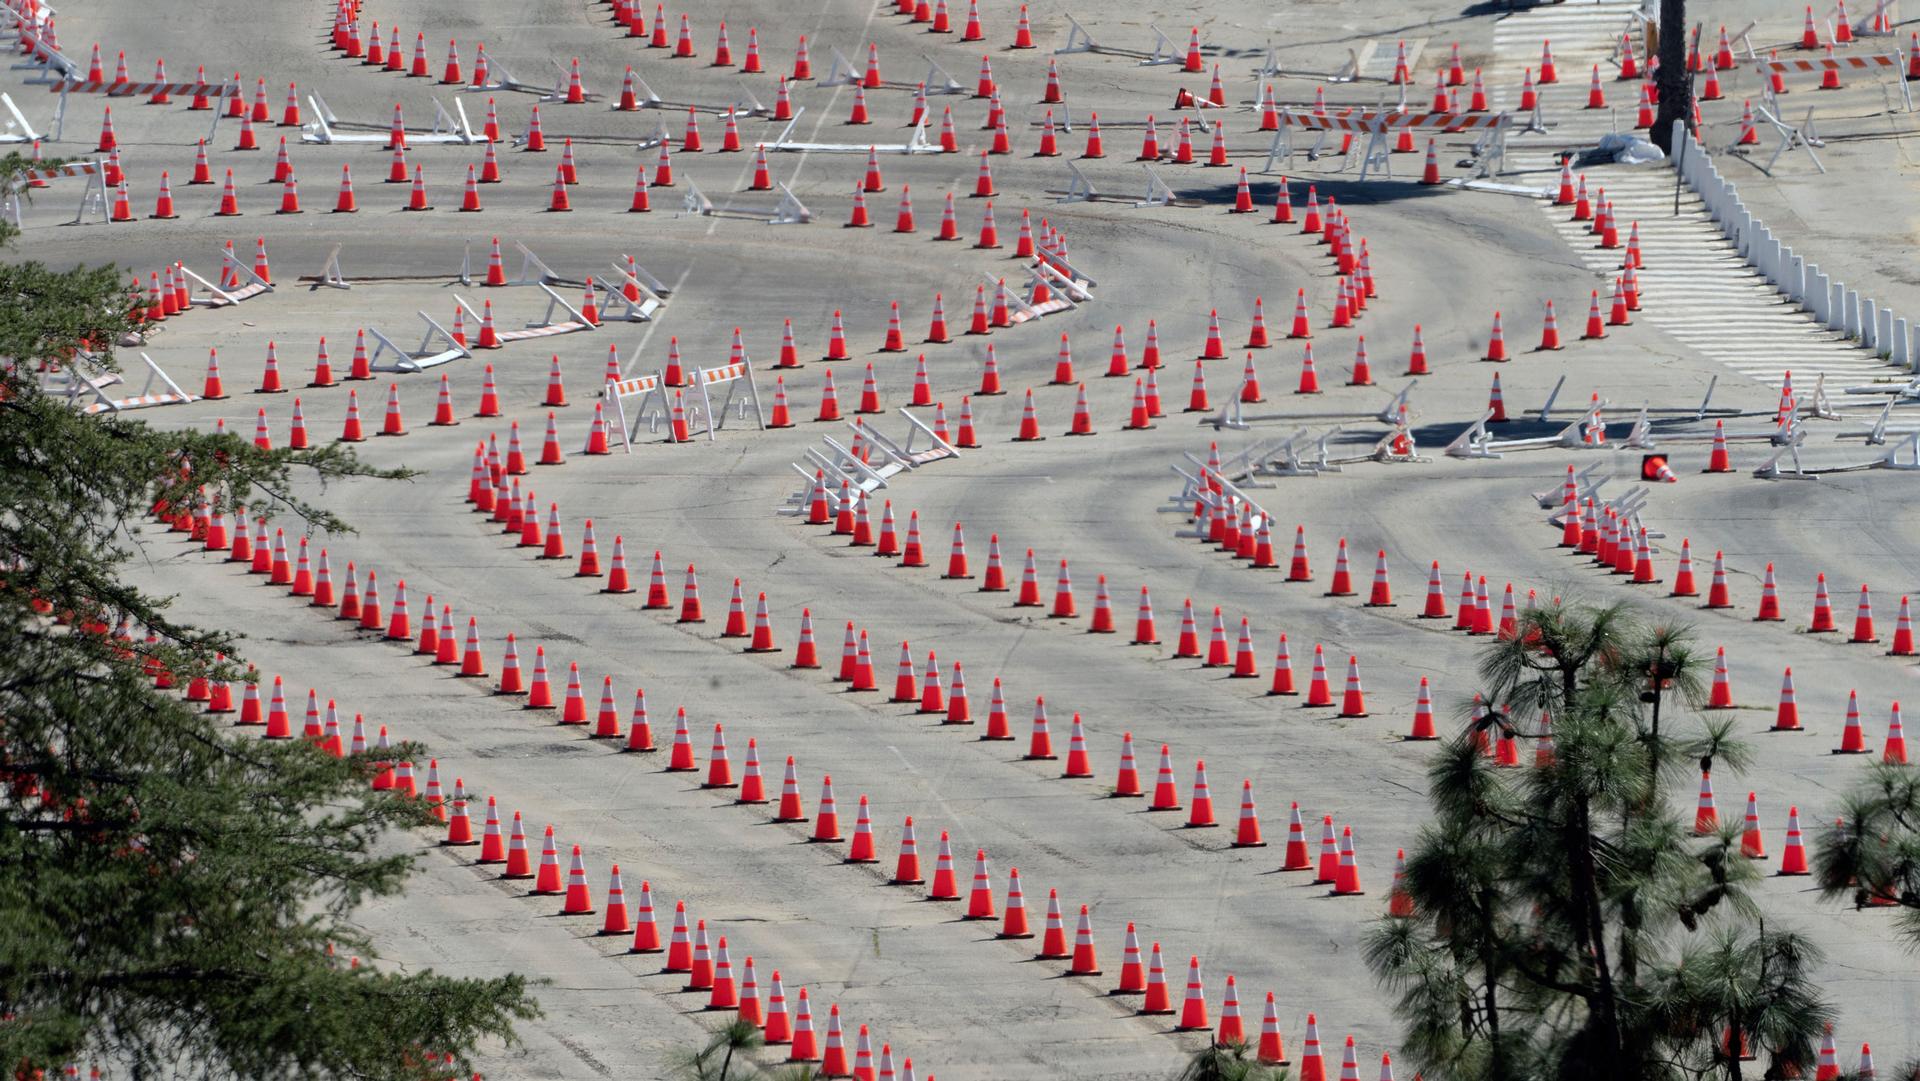 Several long lines of traffic cones are shown winding around an empty parking lot.